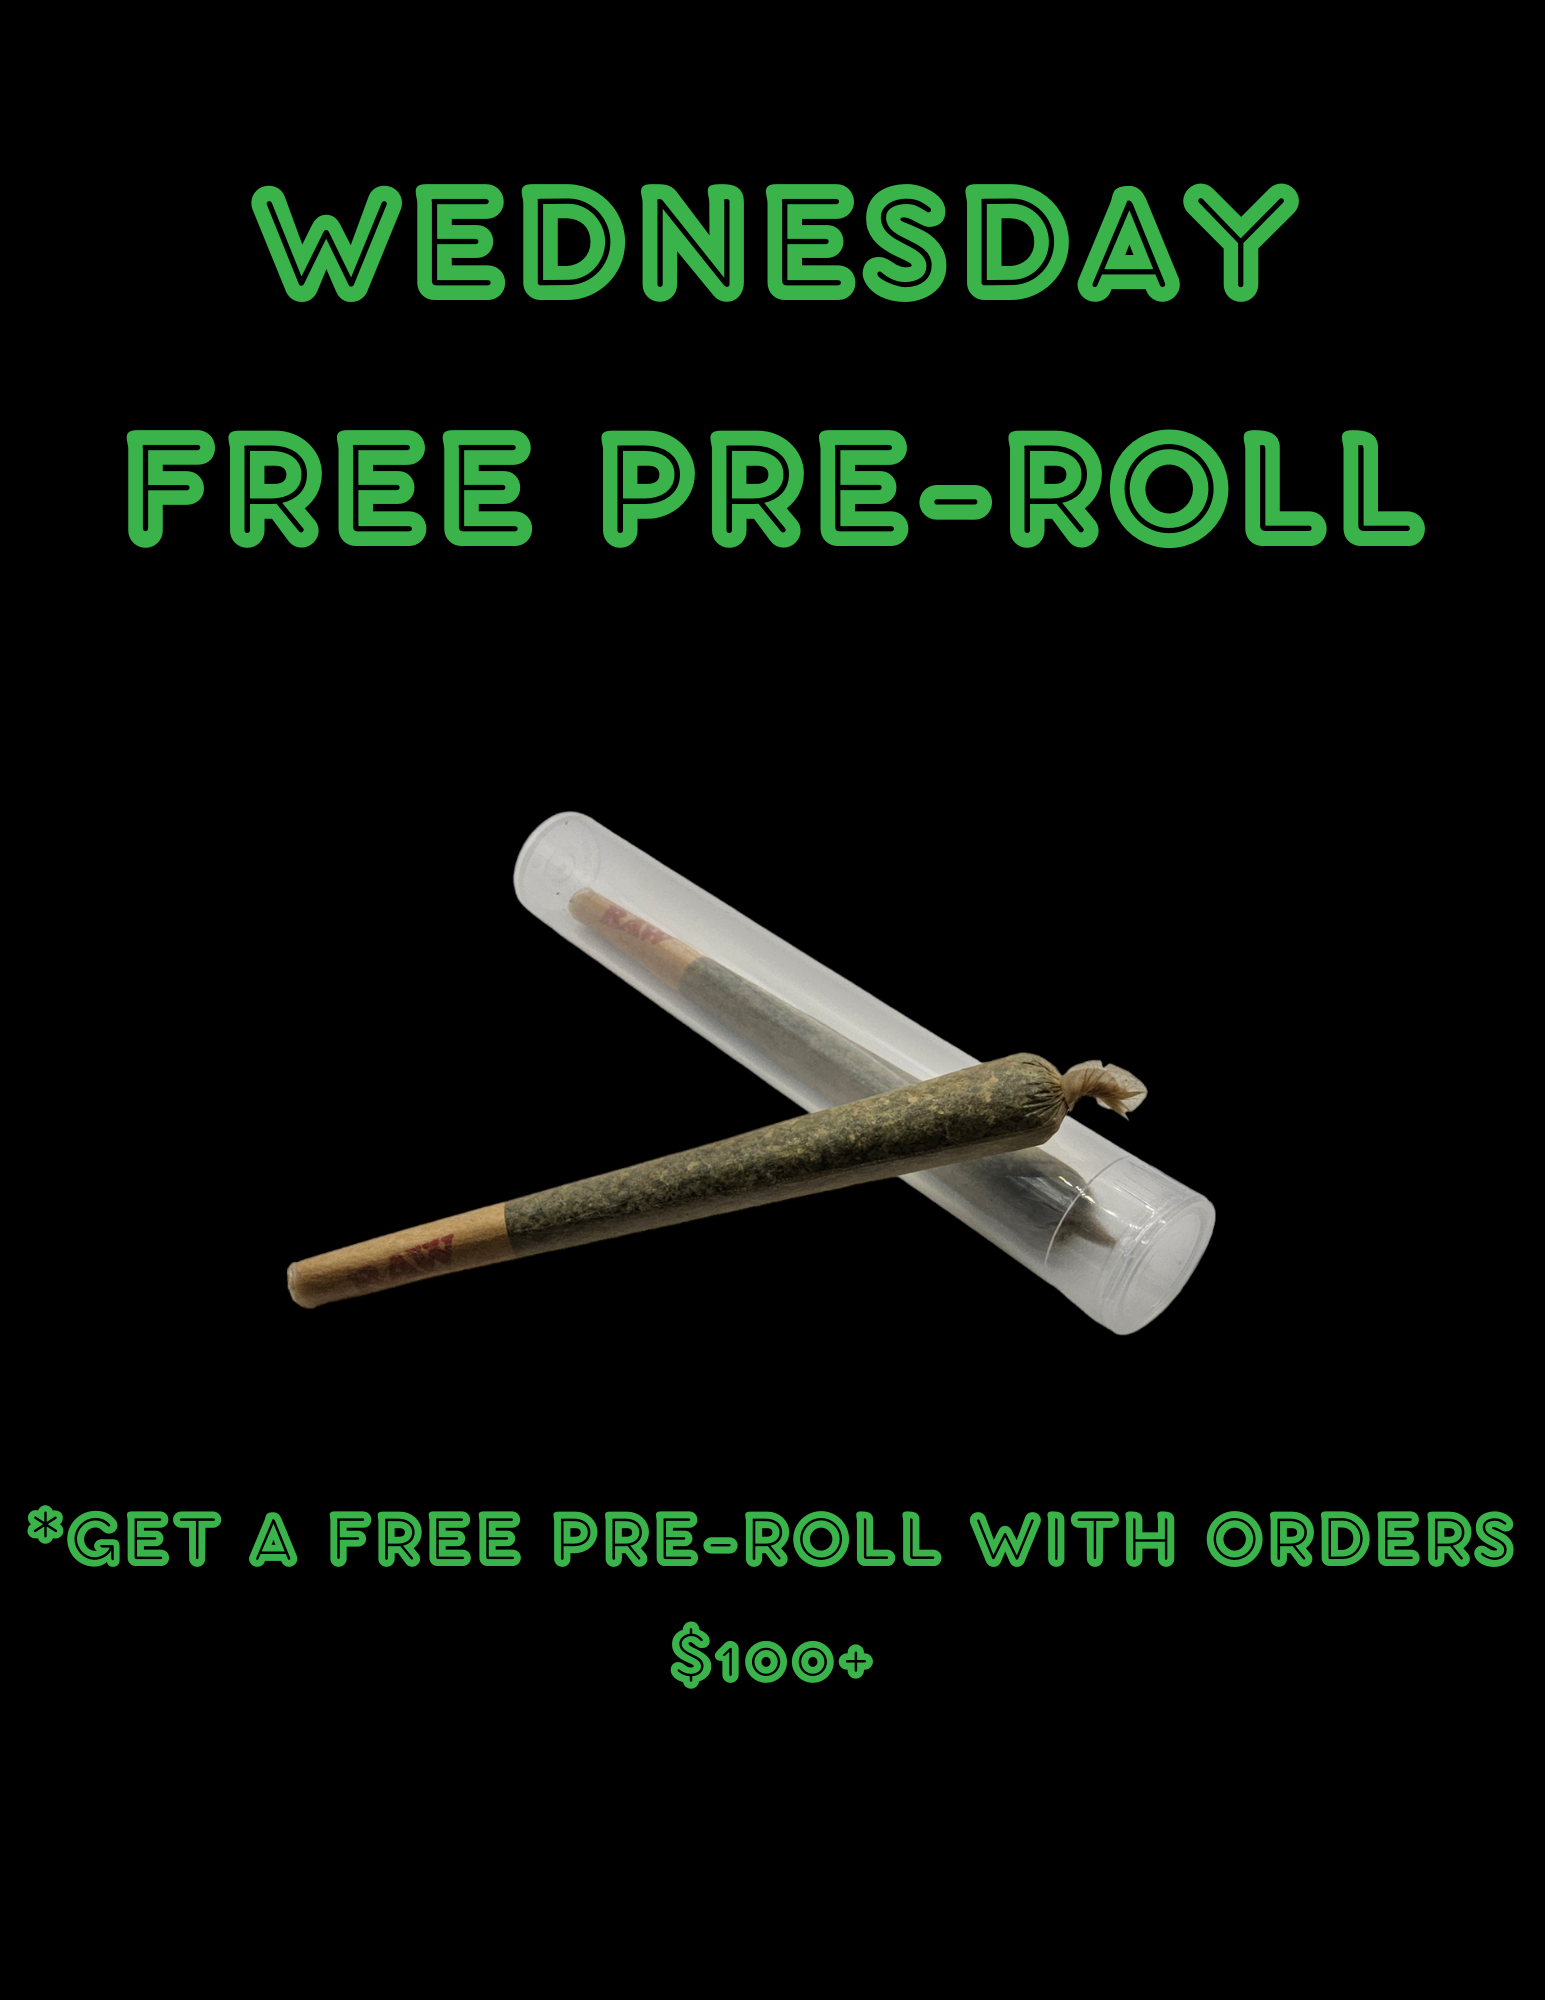 WEDNESDAYS FREE PRE-ROLL WITH EVERY ORDER